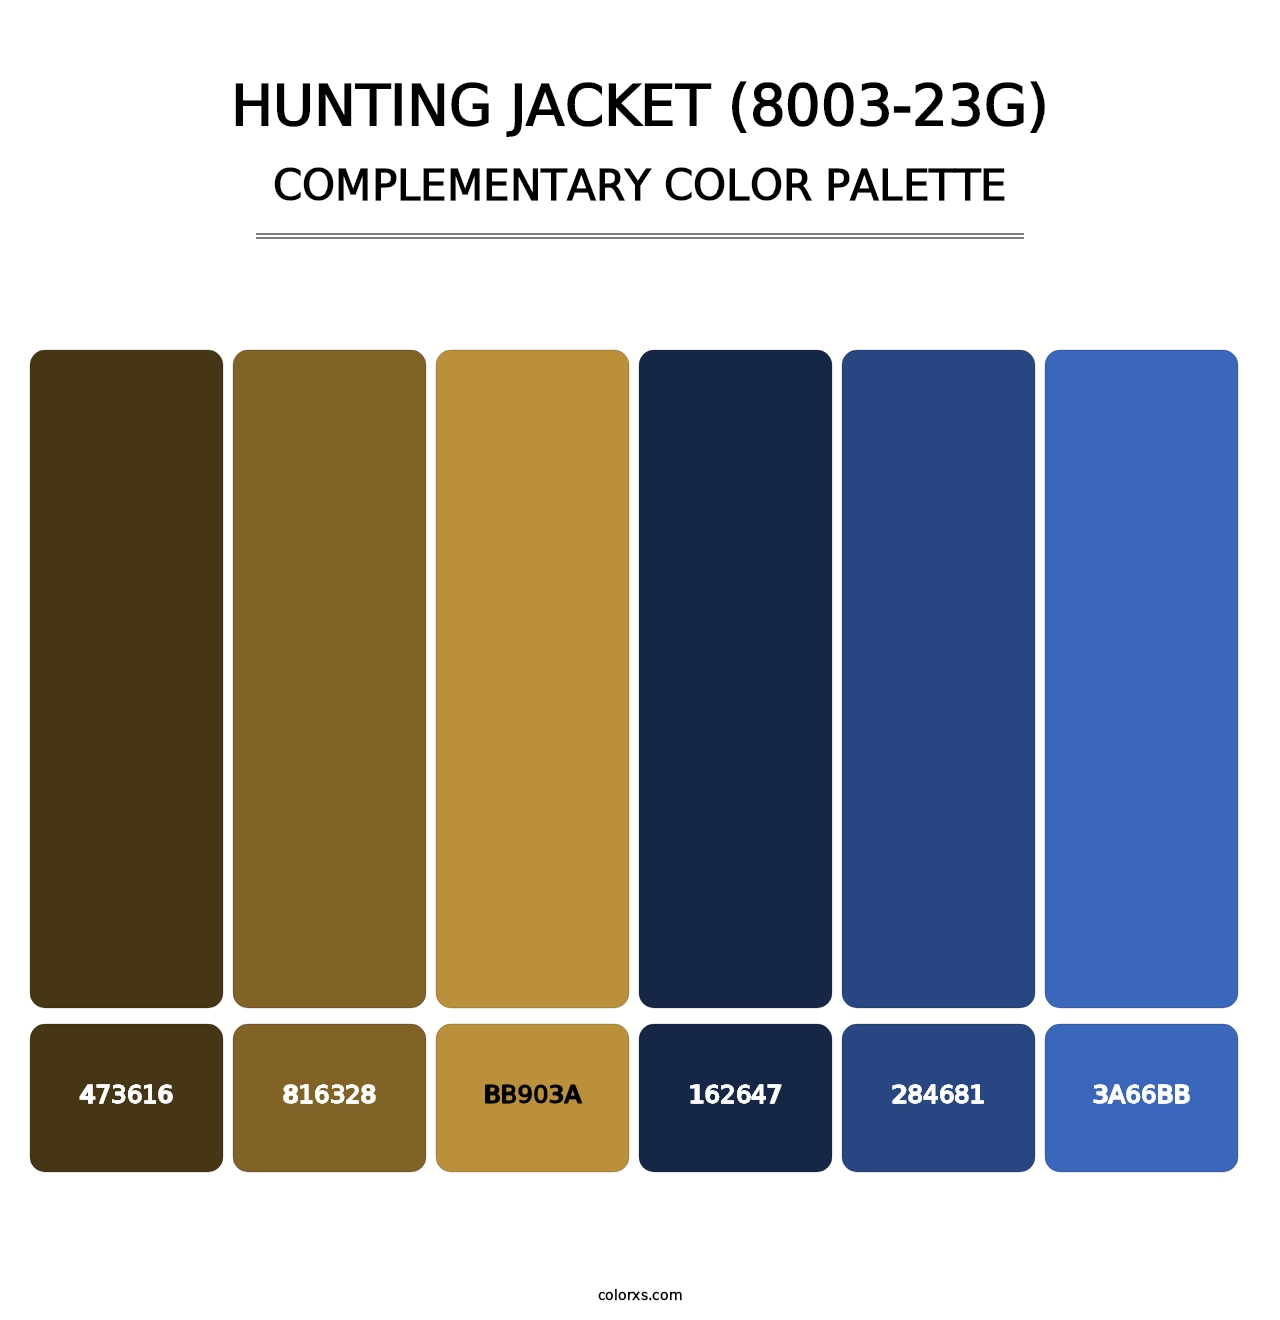 Hunting Jacket (8003-23G) - Complementary Color Palette